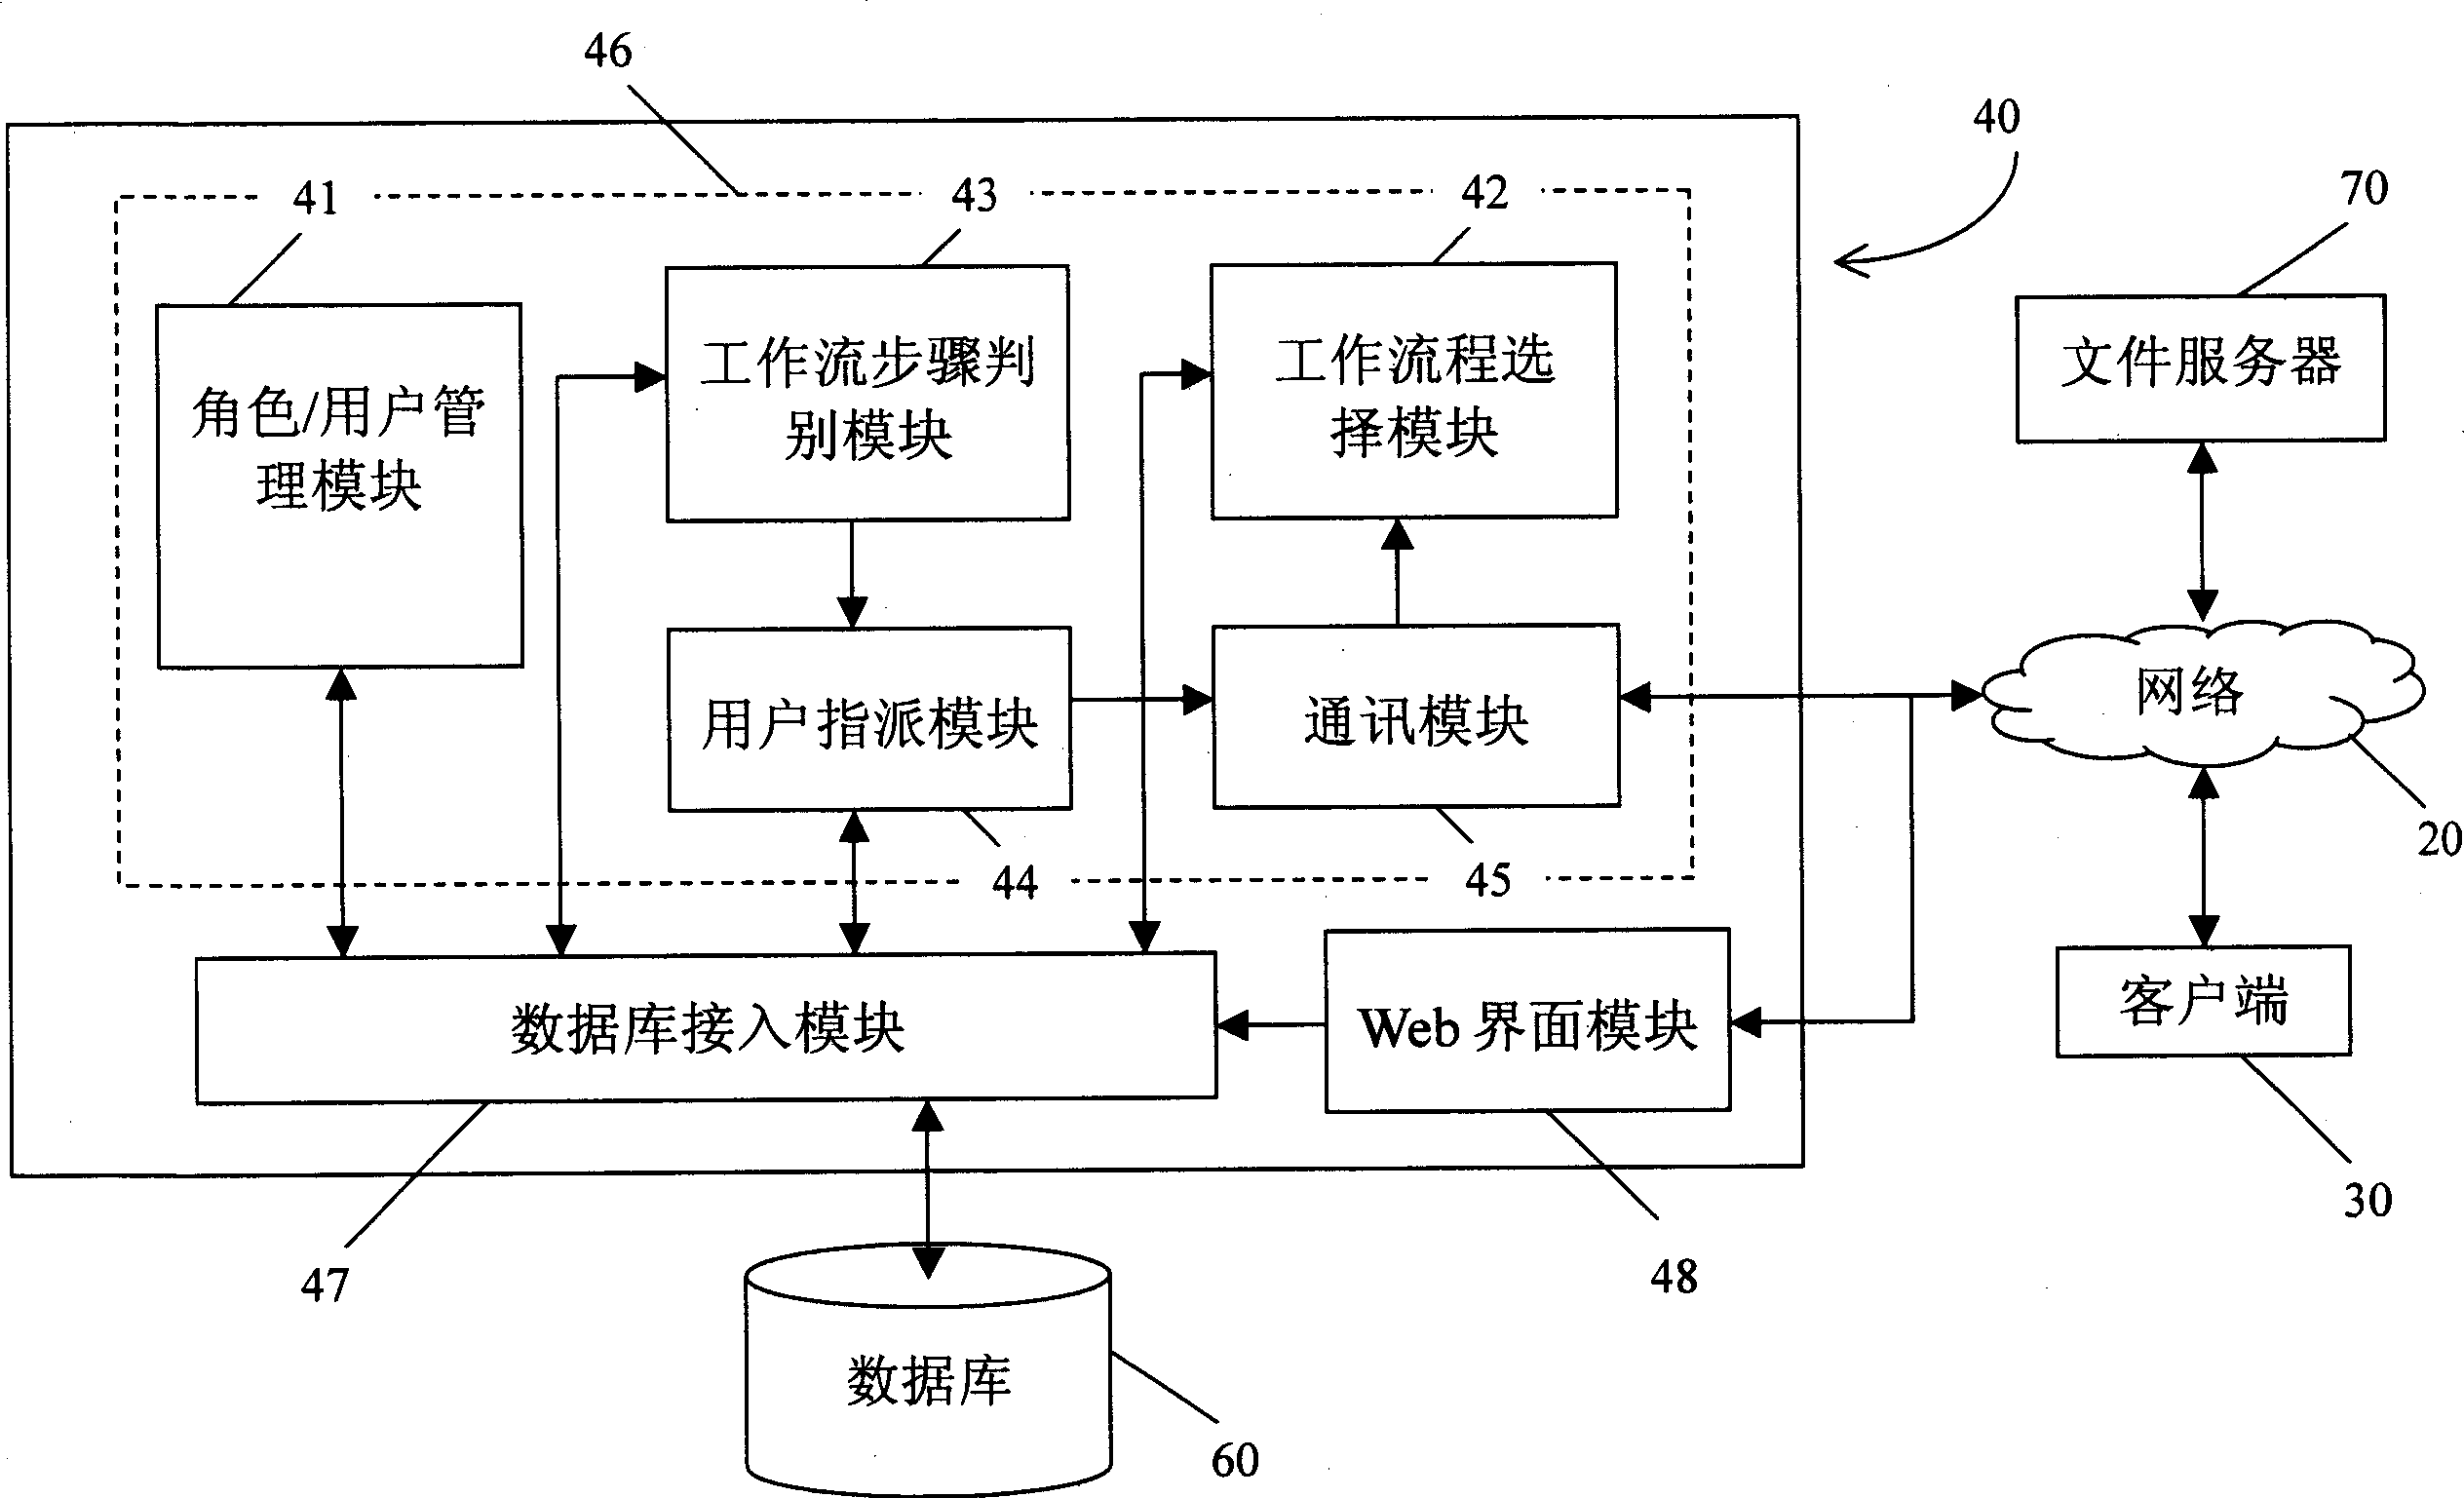 Operation process distributing system and method